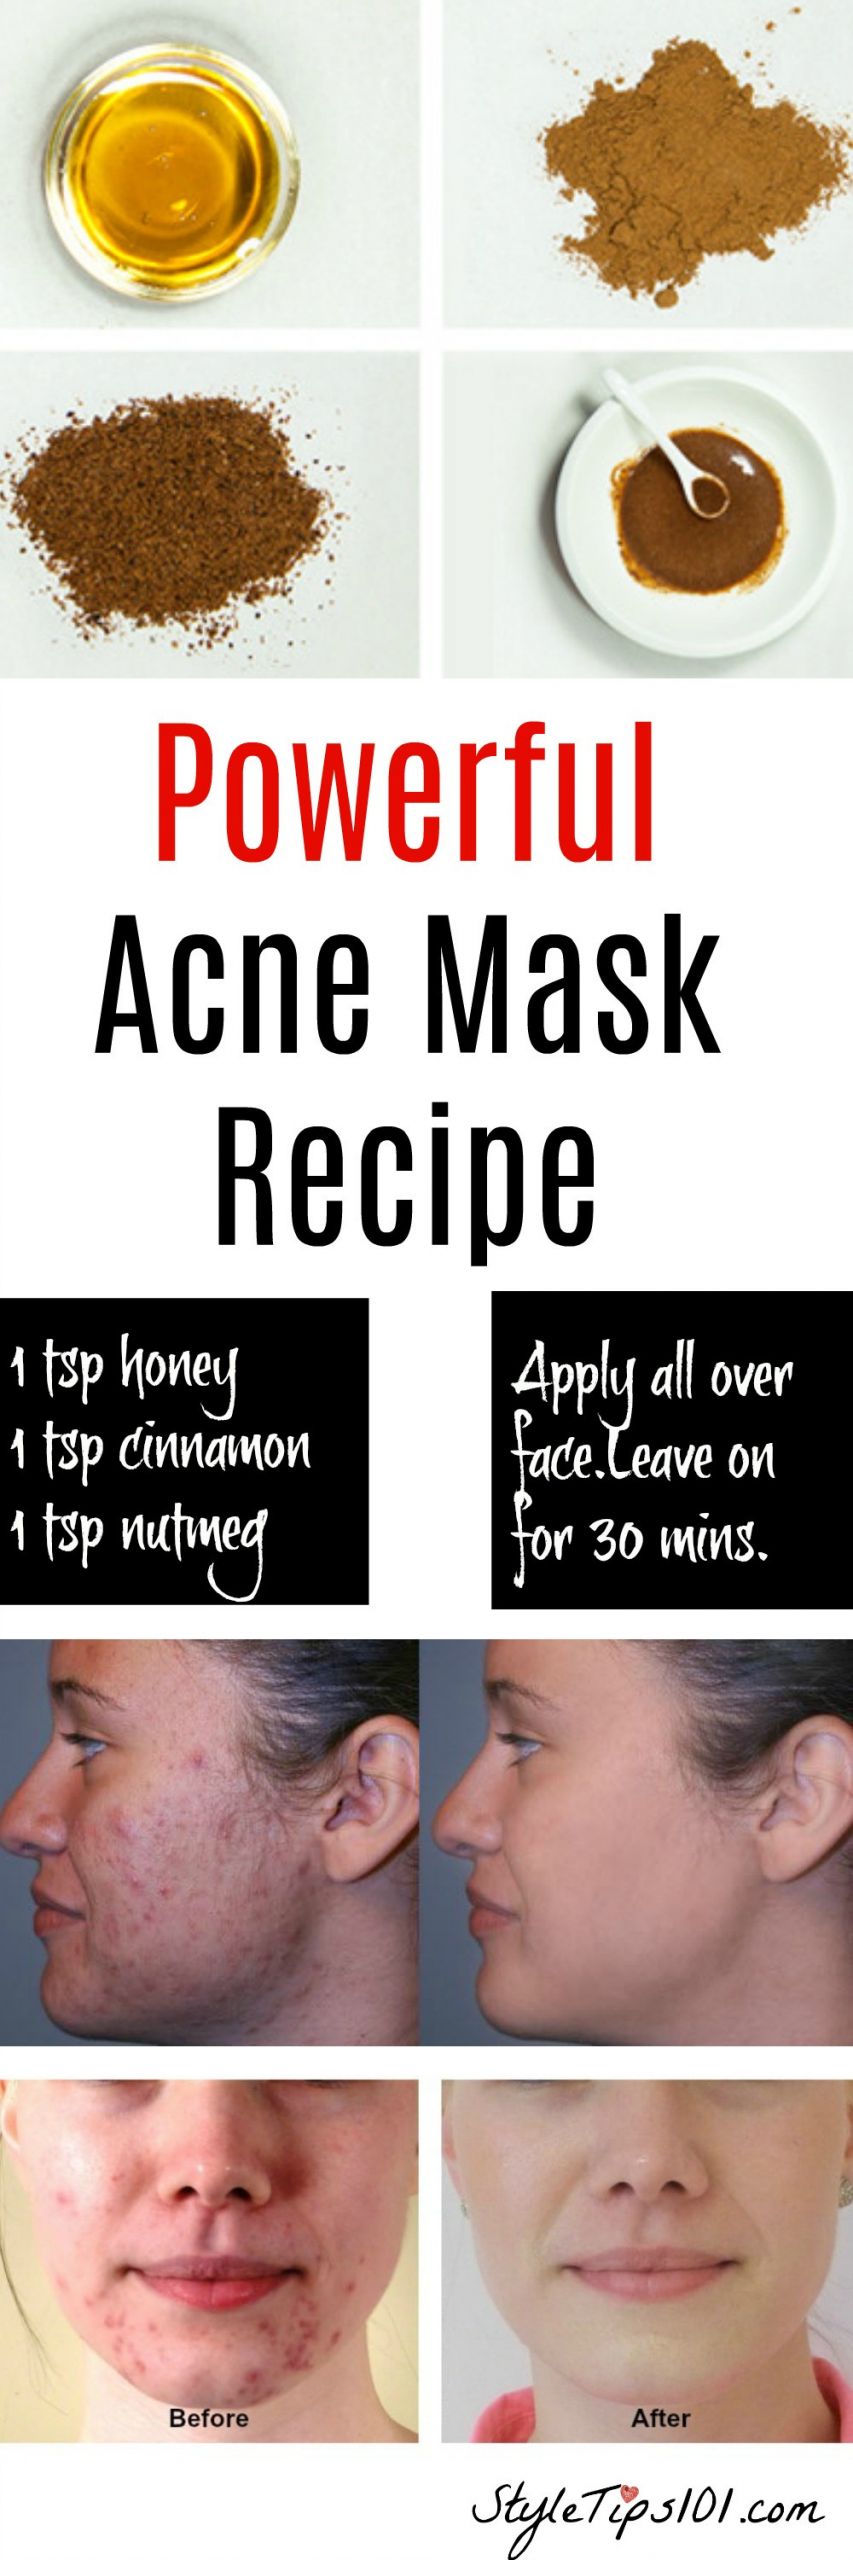 Face Mask For Acne DIY
 Homemade Natural Acne Mask